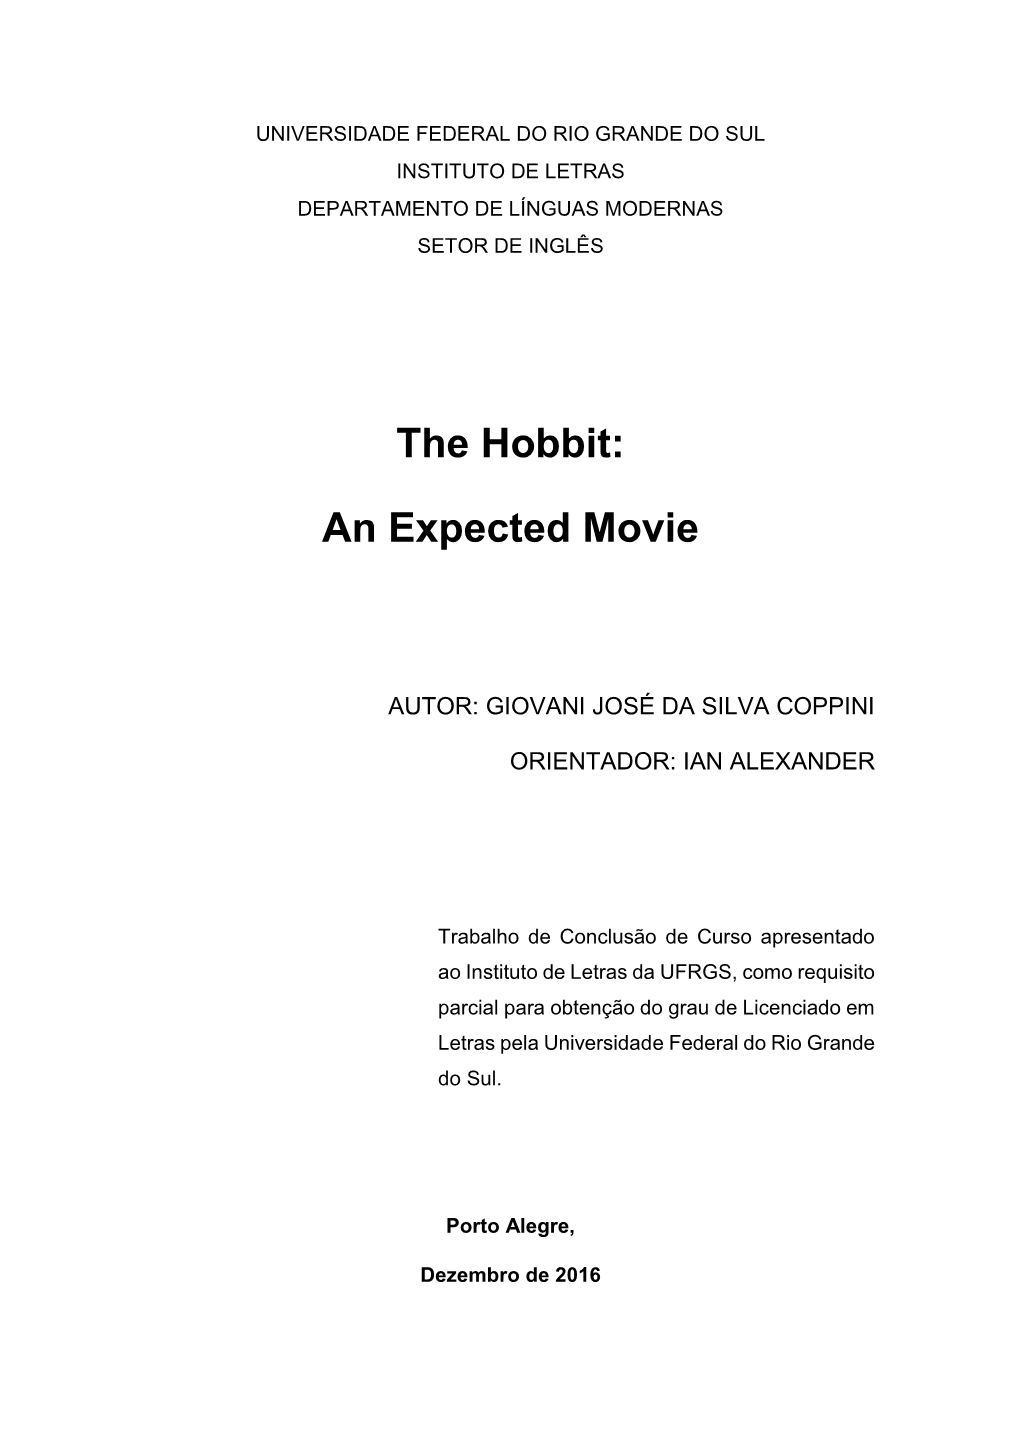 The Hobbit: an Expected Movie